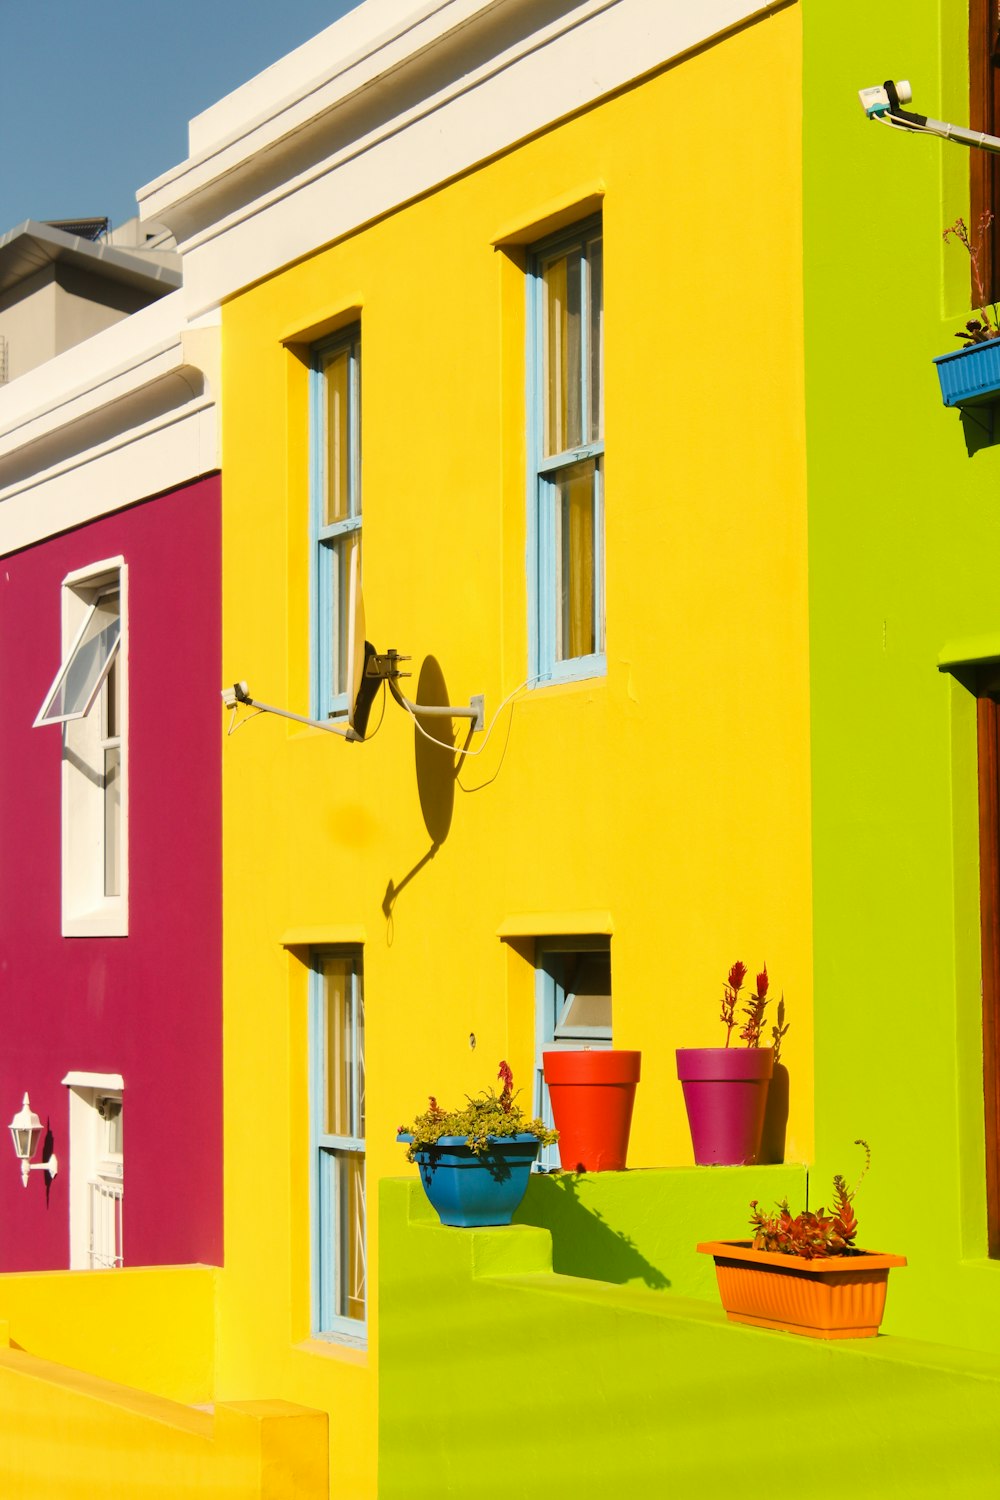 a row of brightly colored houses on a sunny day